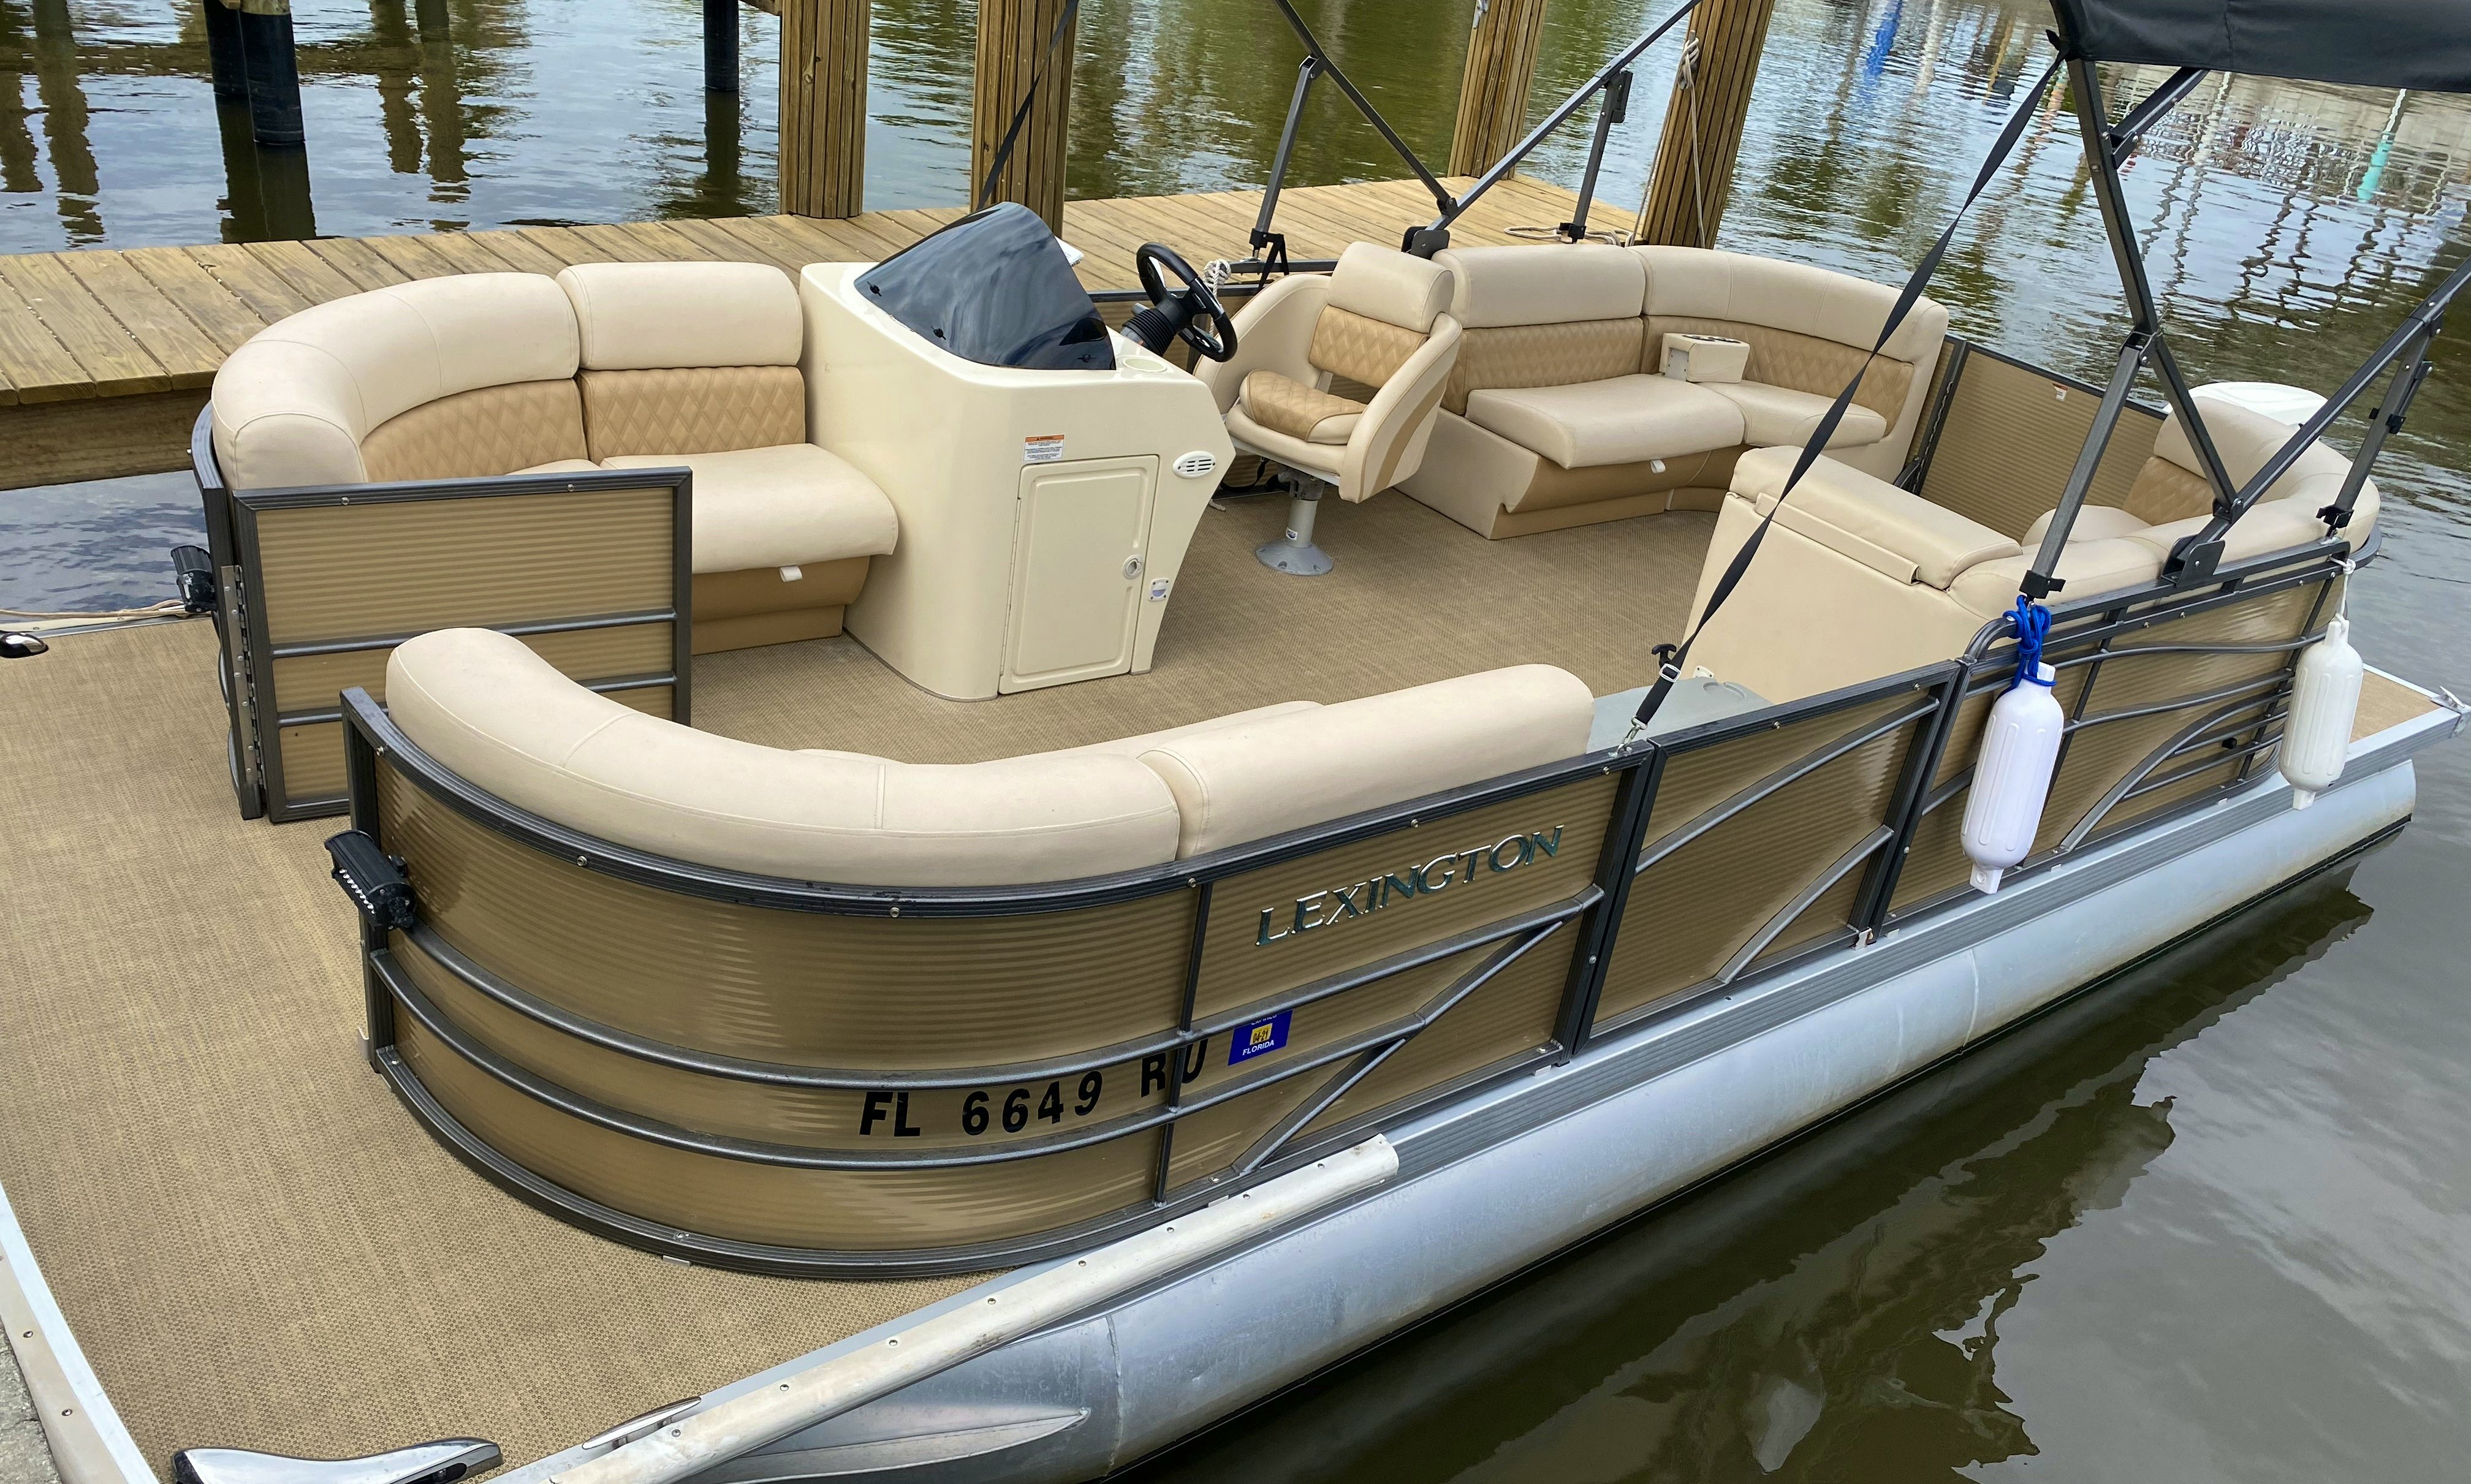 Lexington Pontoon Boat Rentals From Celebration Park To Keewaydin Island Gmb Bookings Must Be 7 Days Or More In Advance Of Charter Date Getmyboat